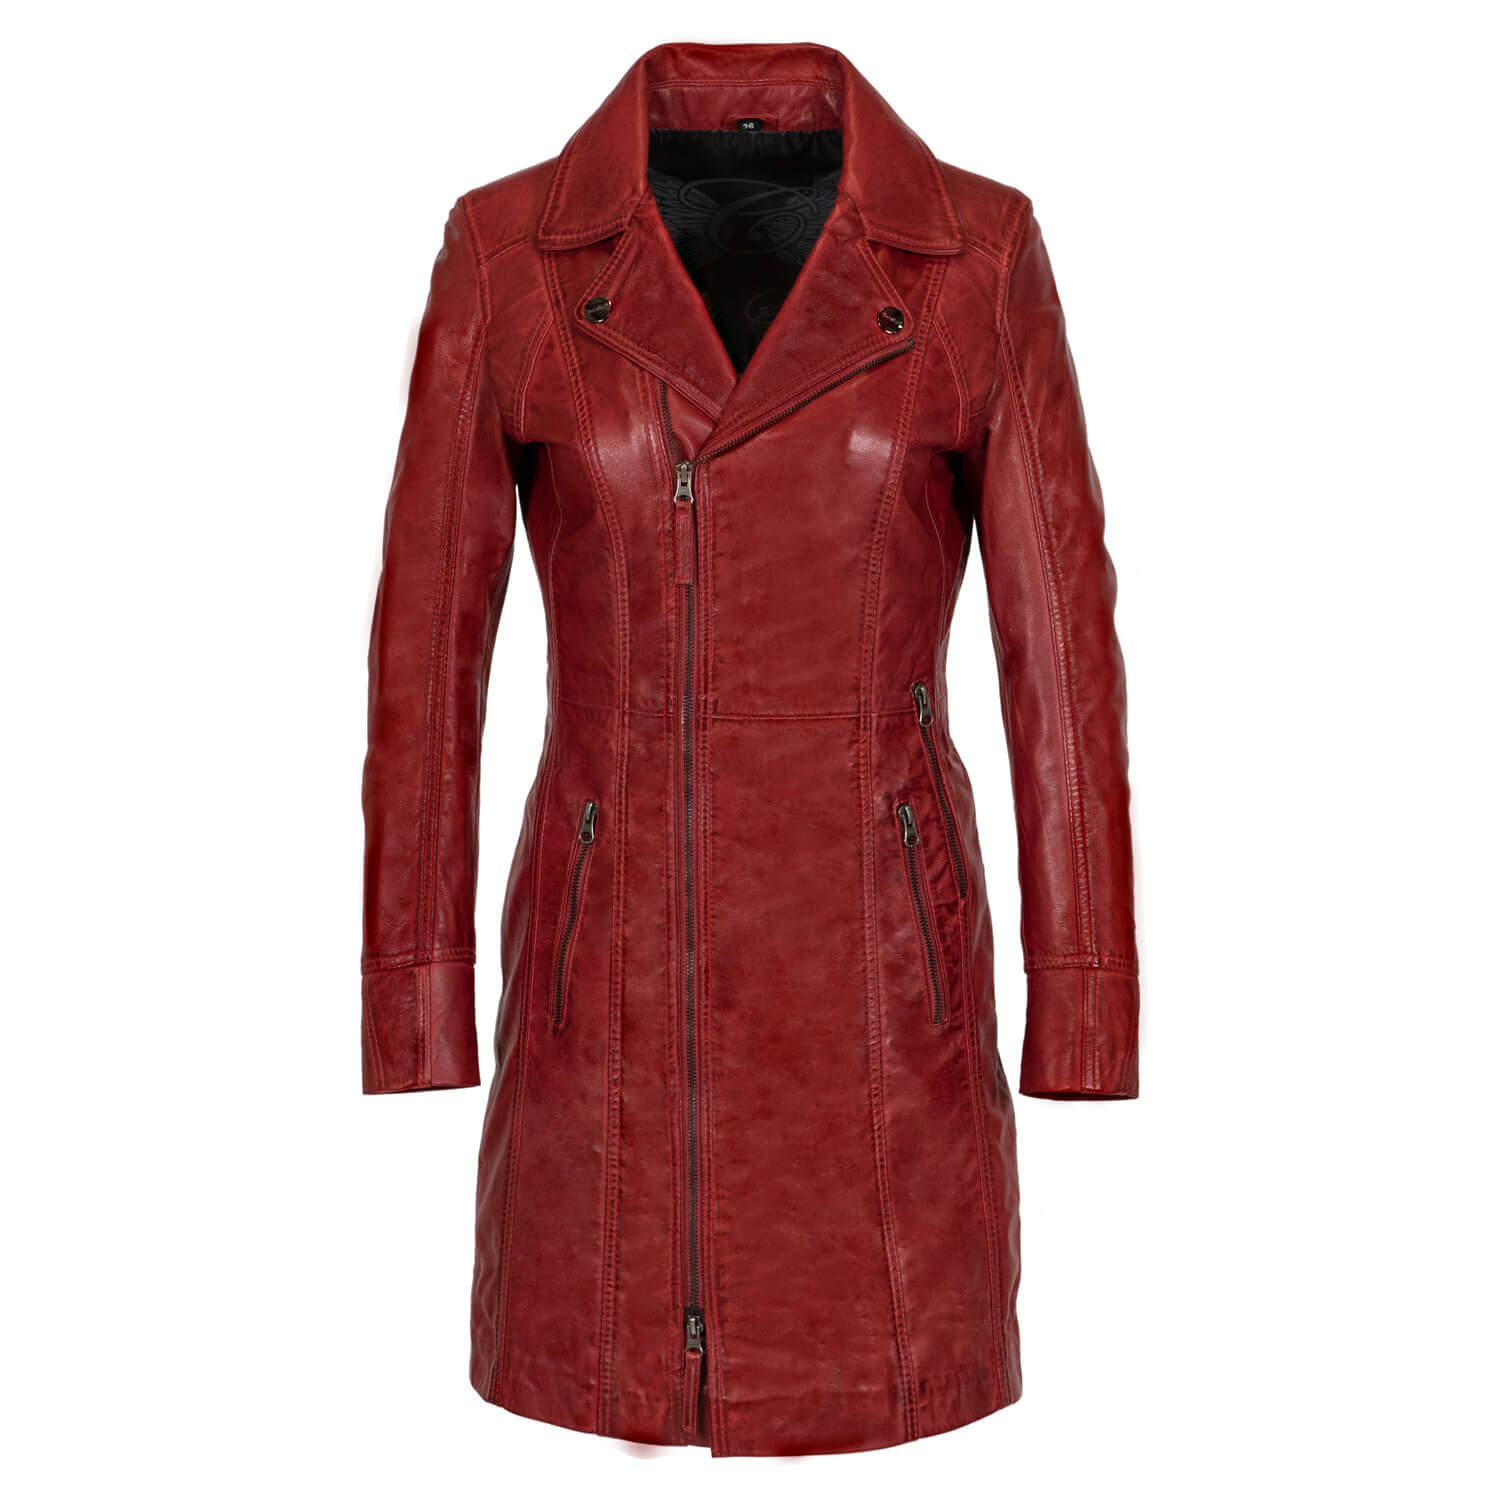 Ladies long leather jacket red Ladycoat